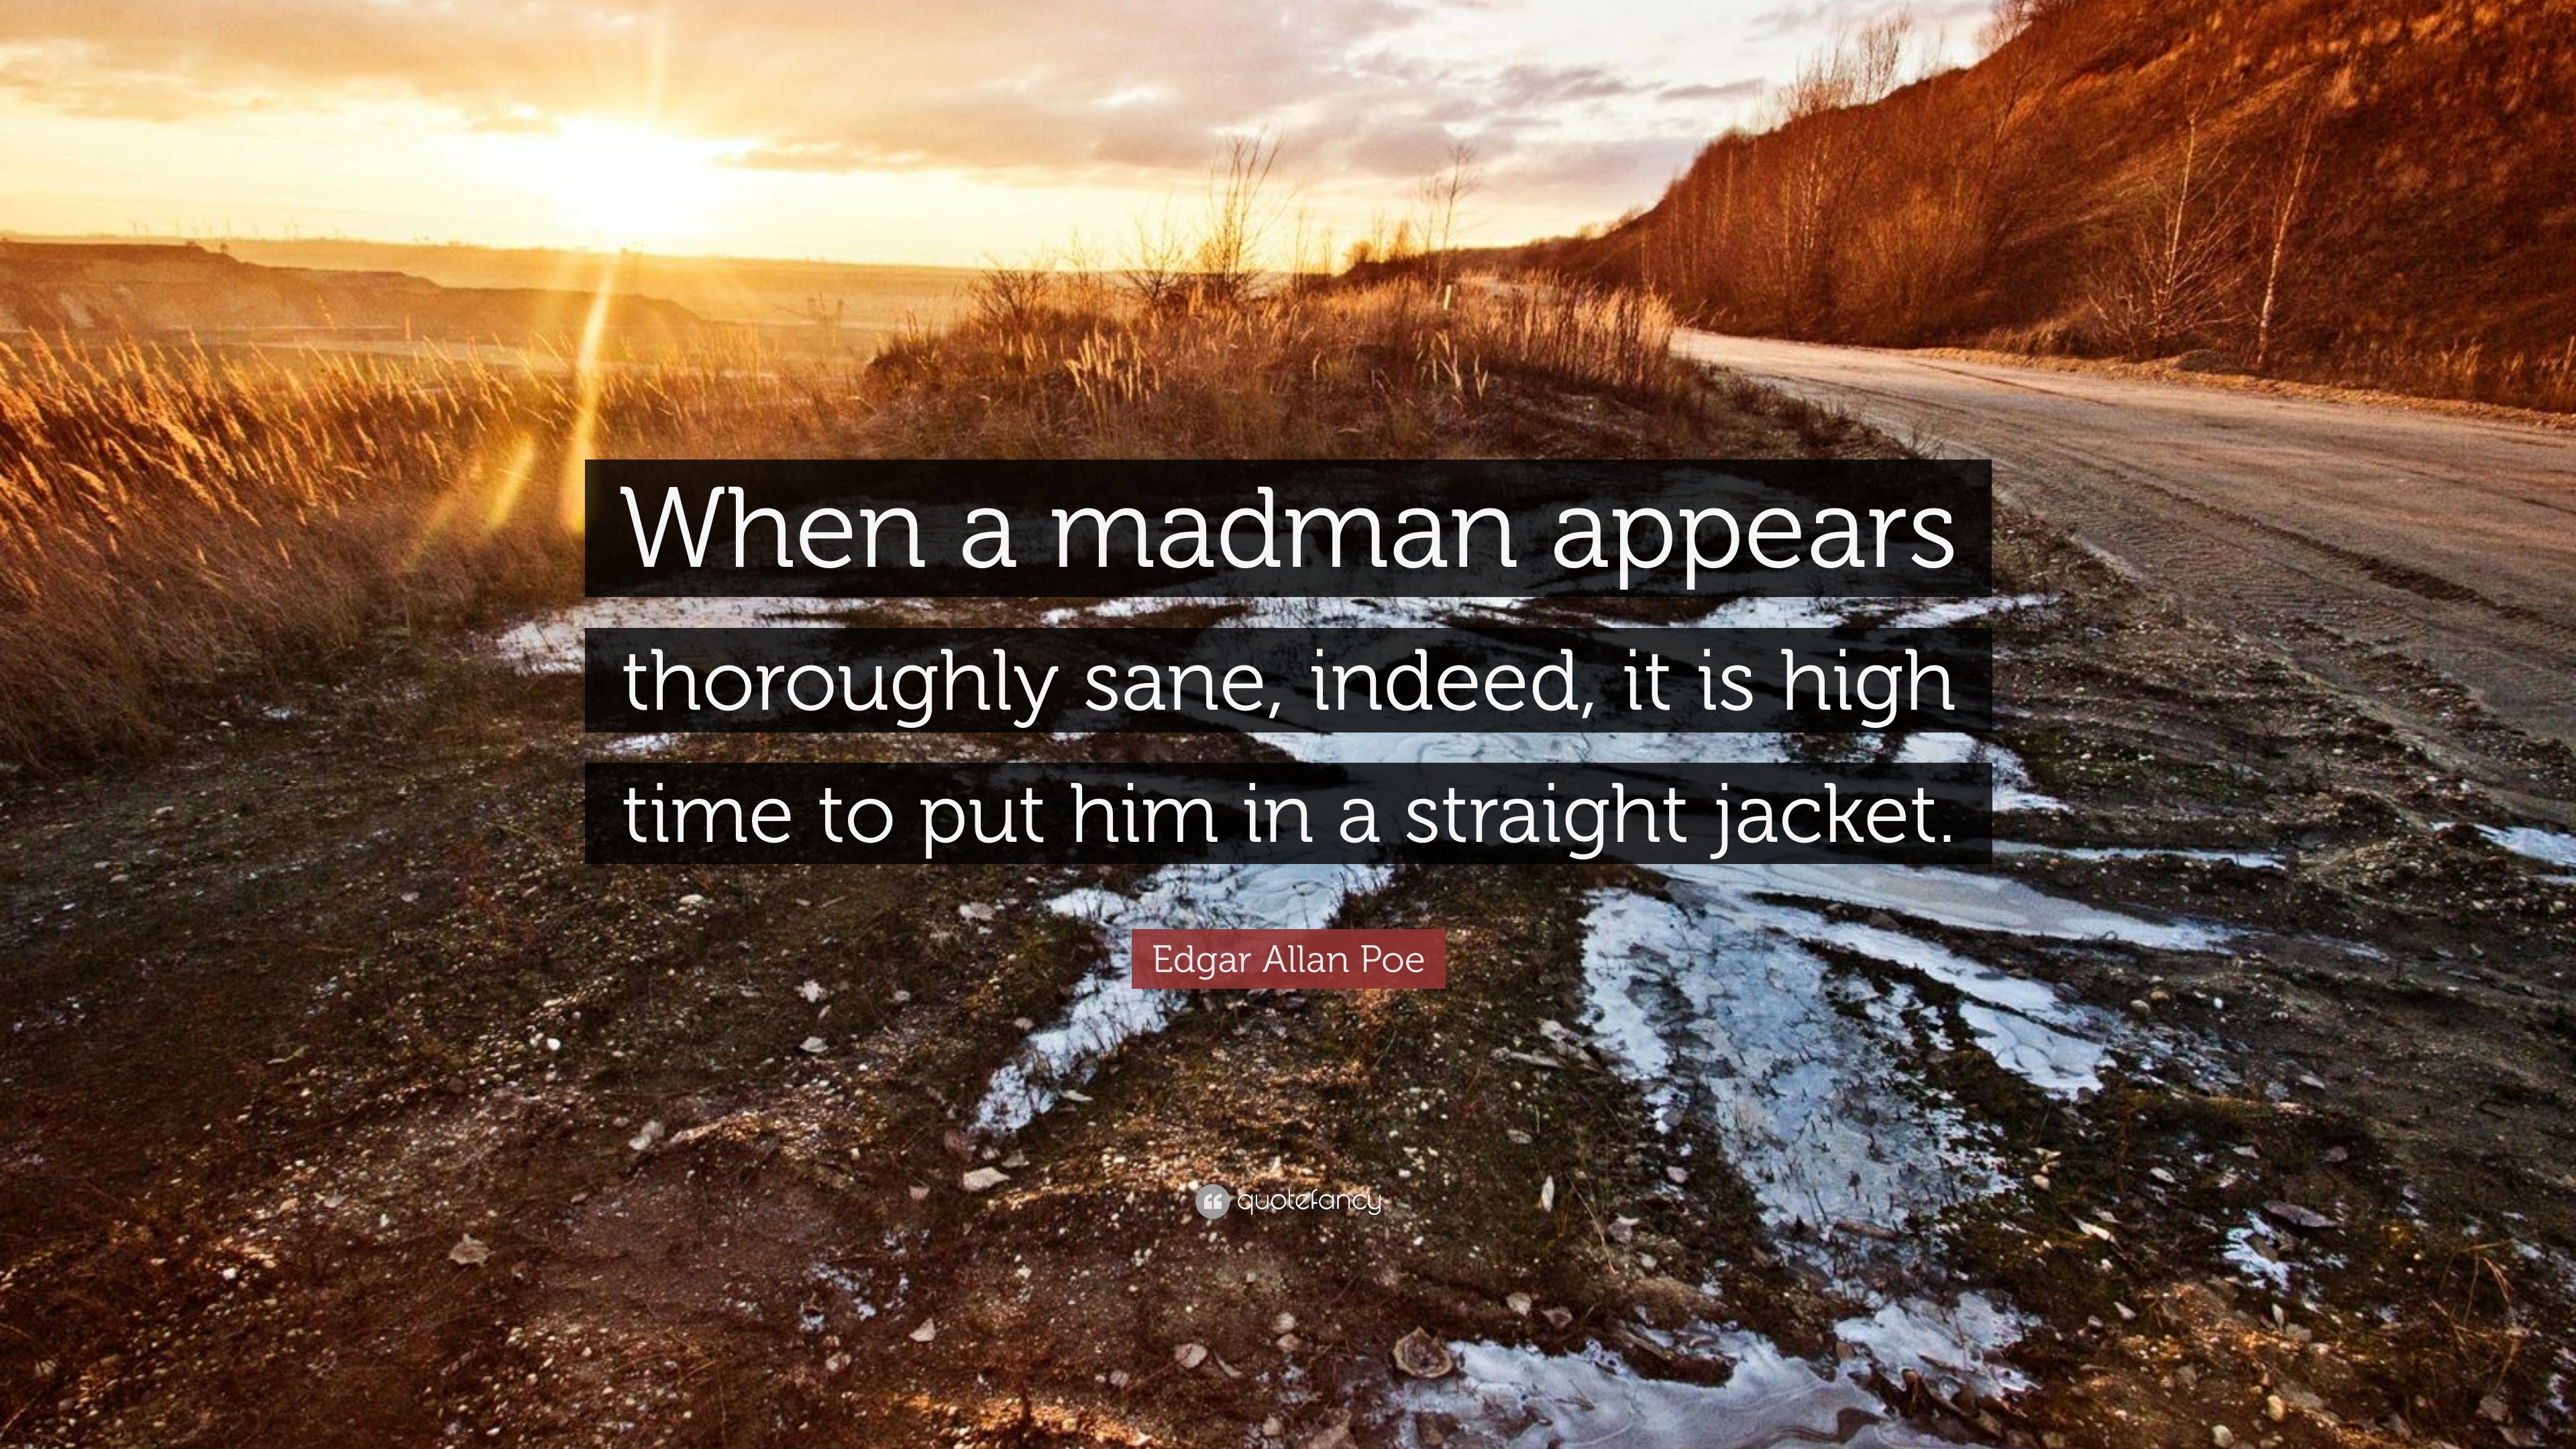 Edgar Allan Poe Quote: “When a madman appears thoroughly sane